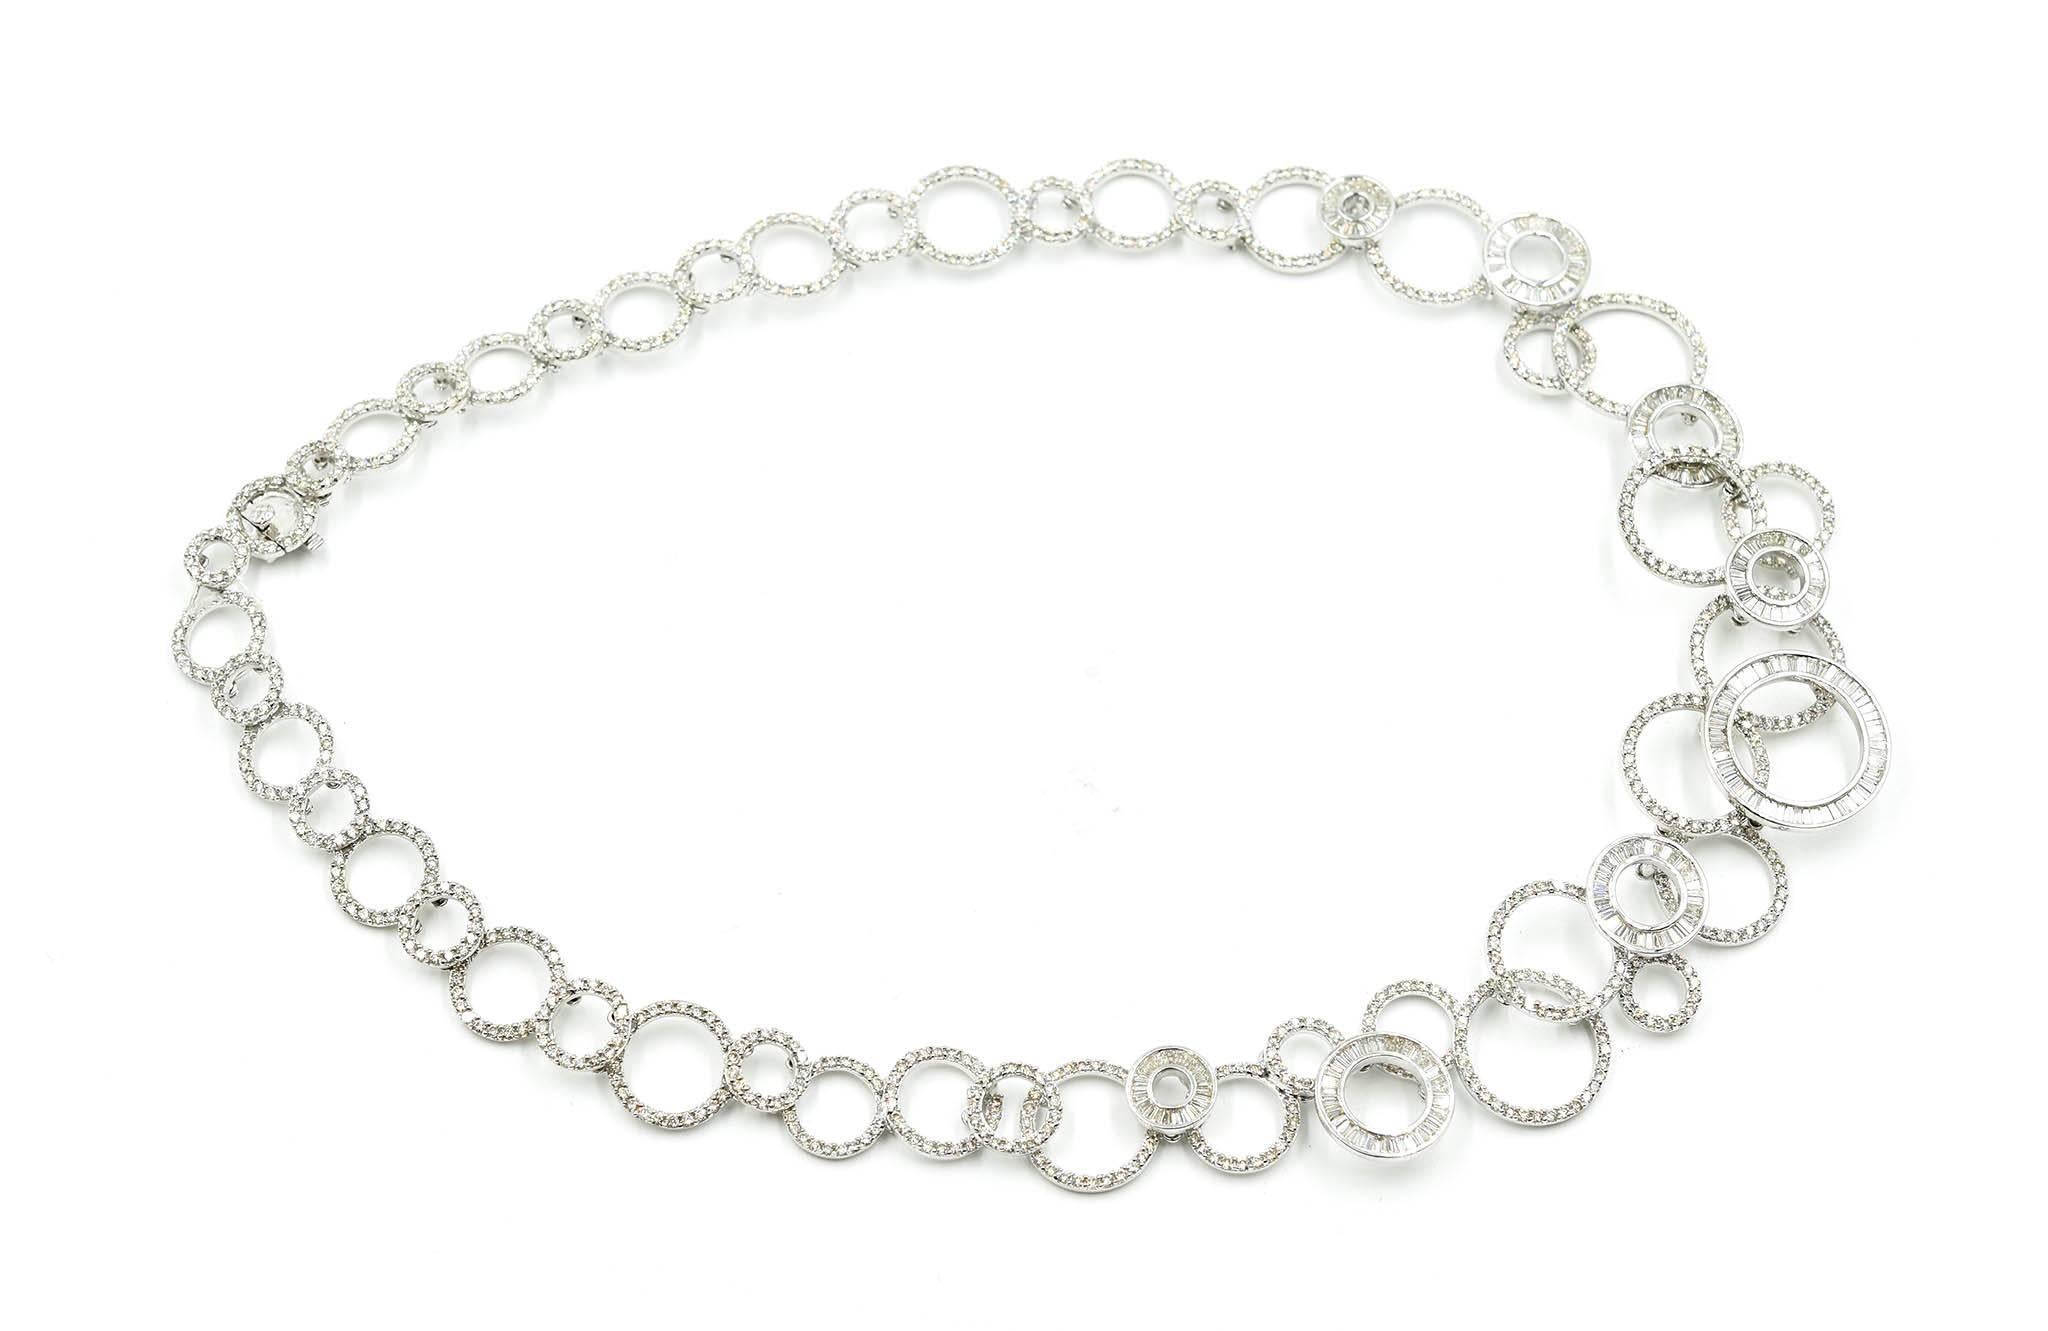 Dazzling diamonds on your neck! This is a 18k white gold circle linked necklace with round and baguette diamonds. The diamonds amount to 975 round diamonds and 250 baguette diamonds. The diamonds weigh 13.44 carats. The round diamonds are prong set